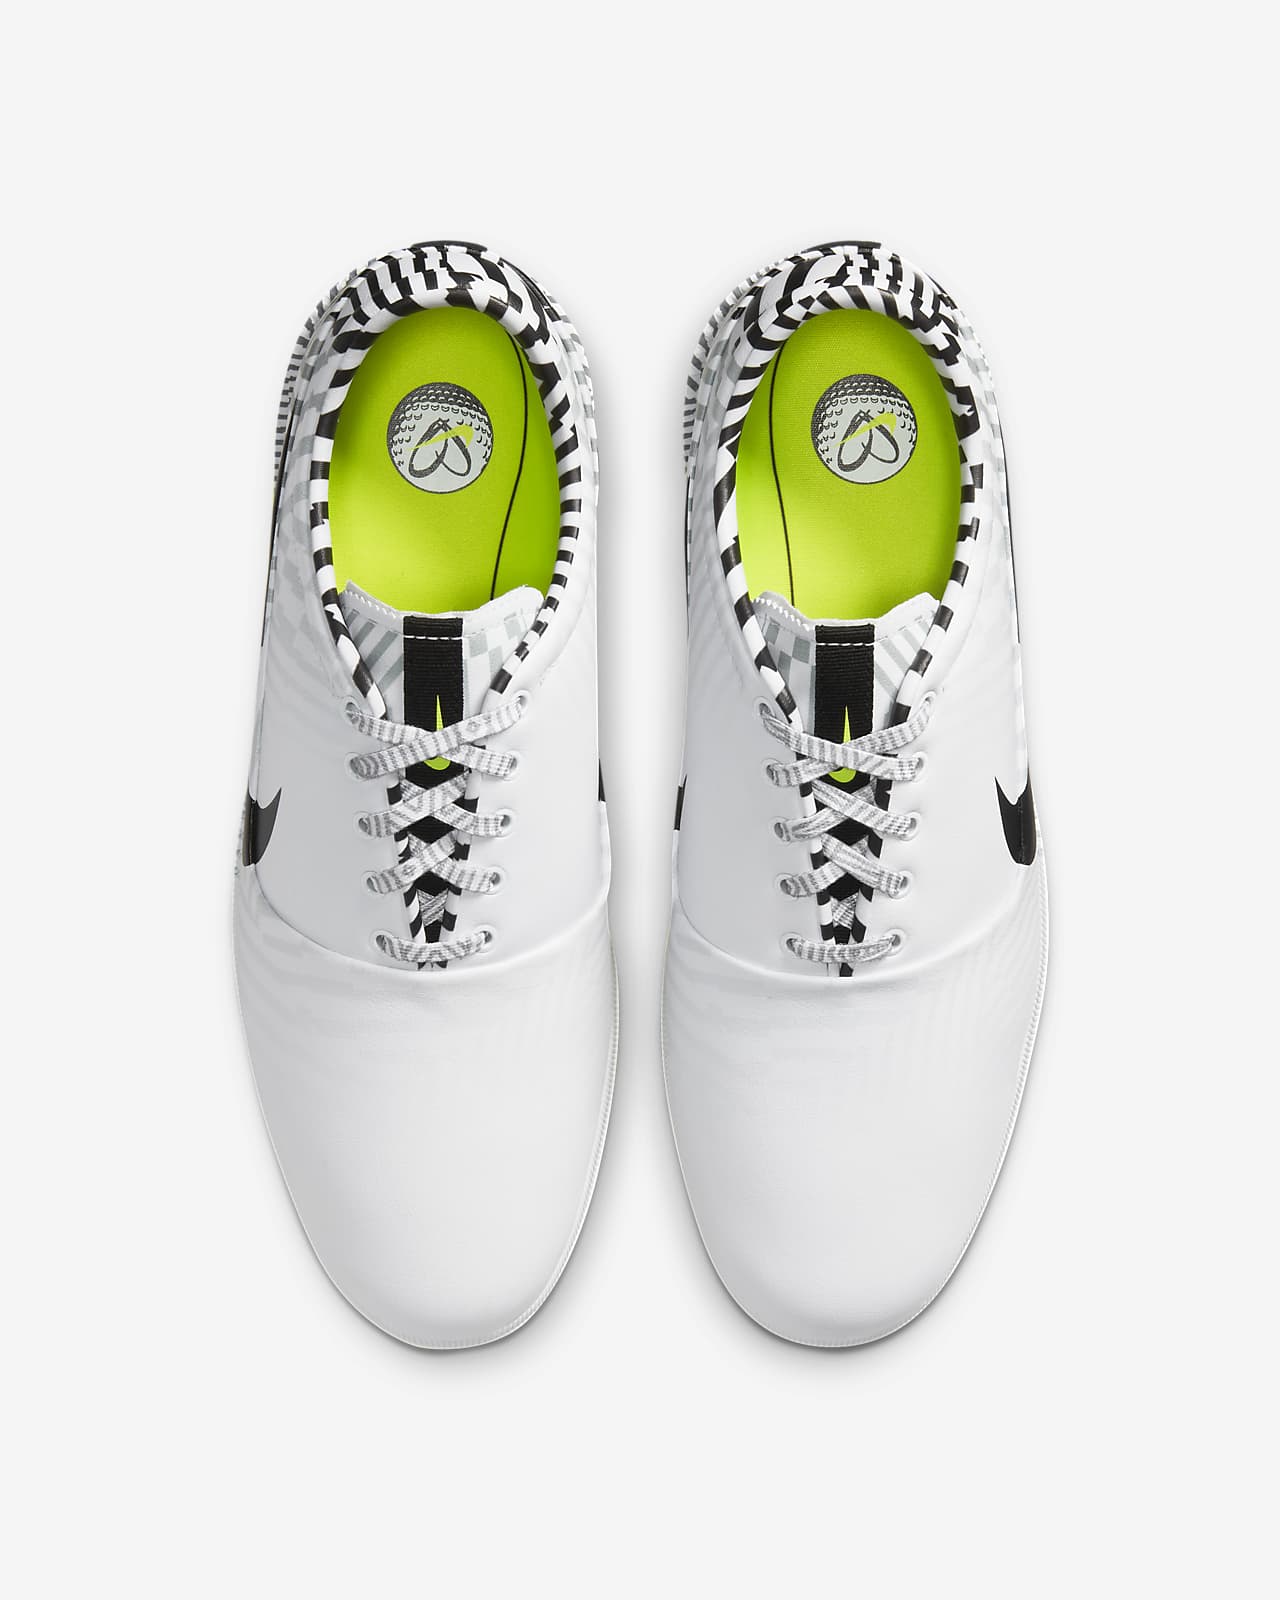 nike air zoom victory tour zapatos golf